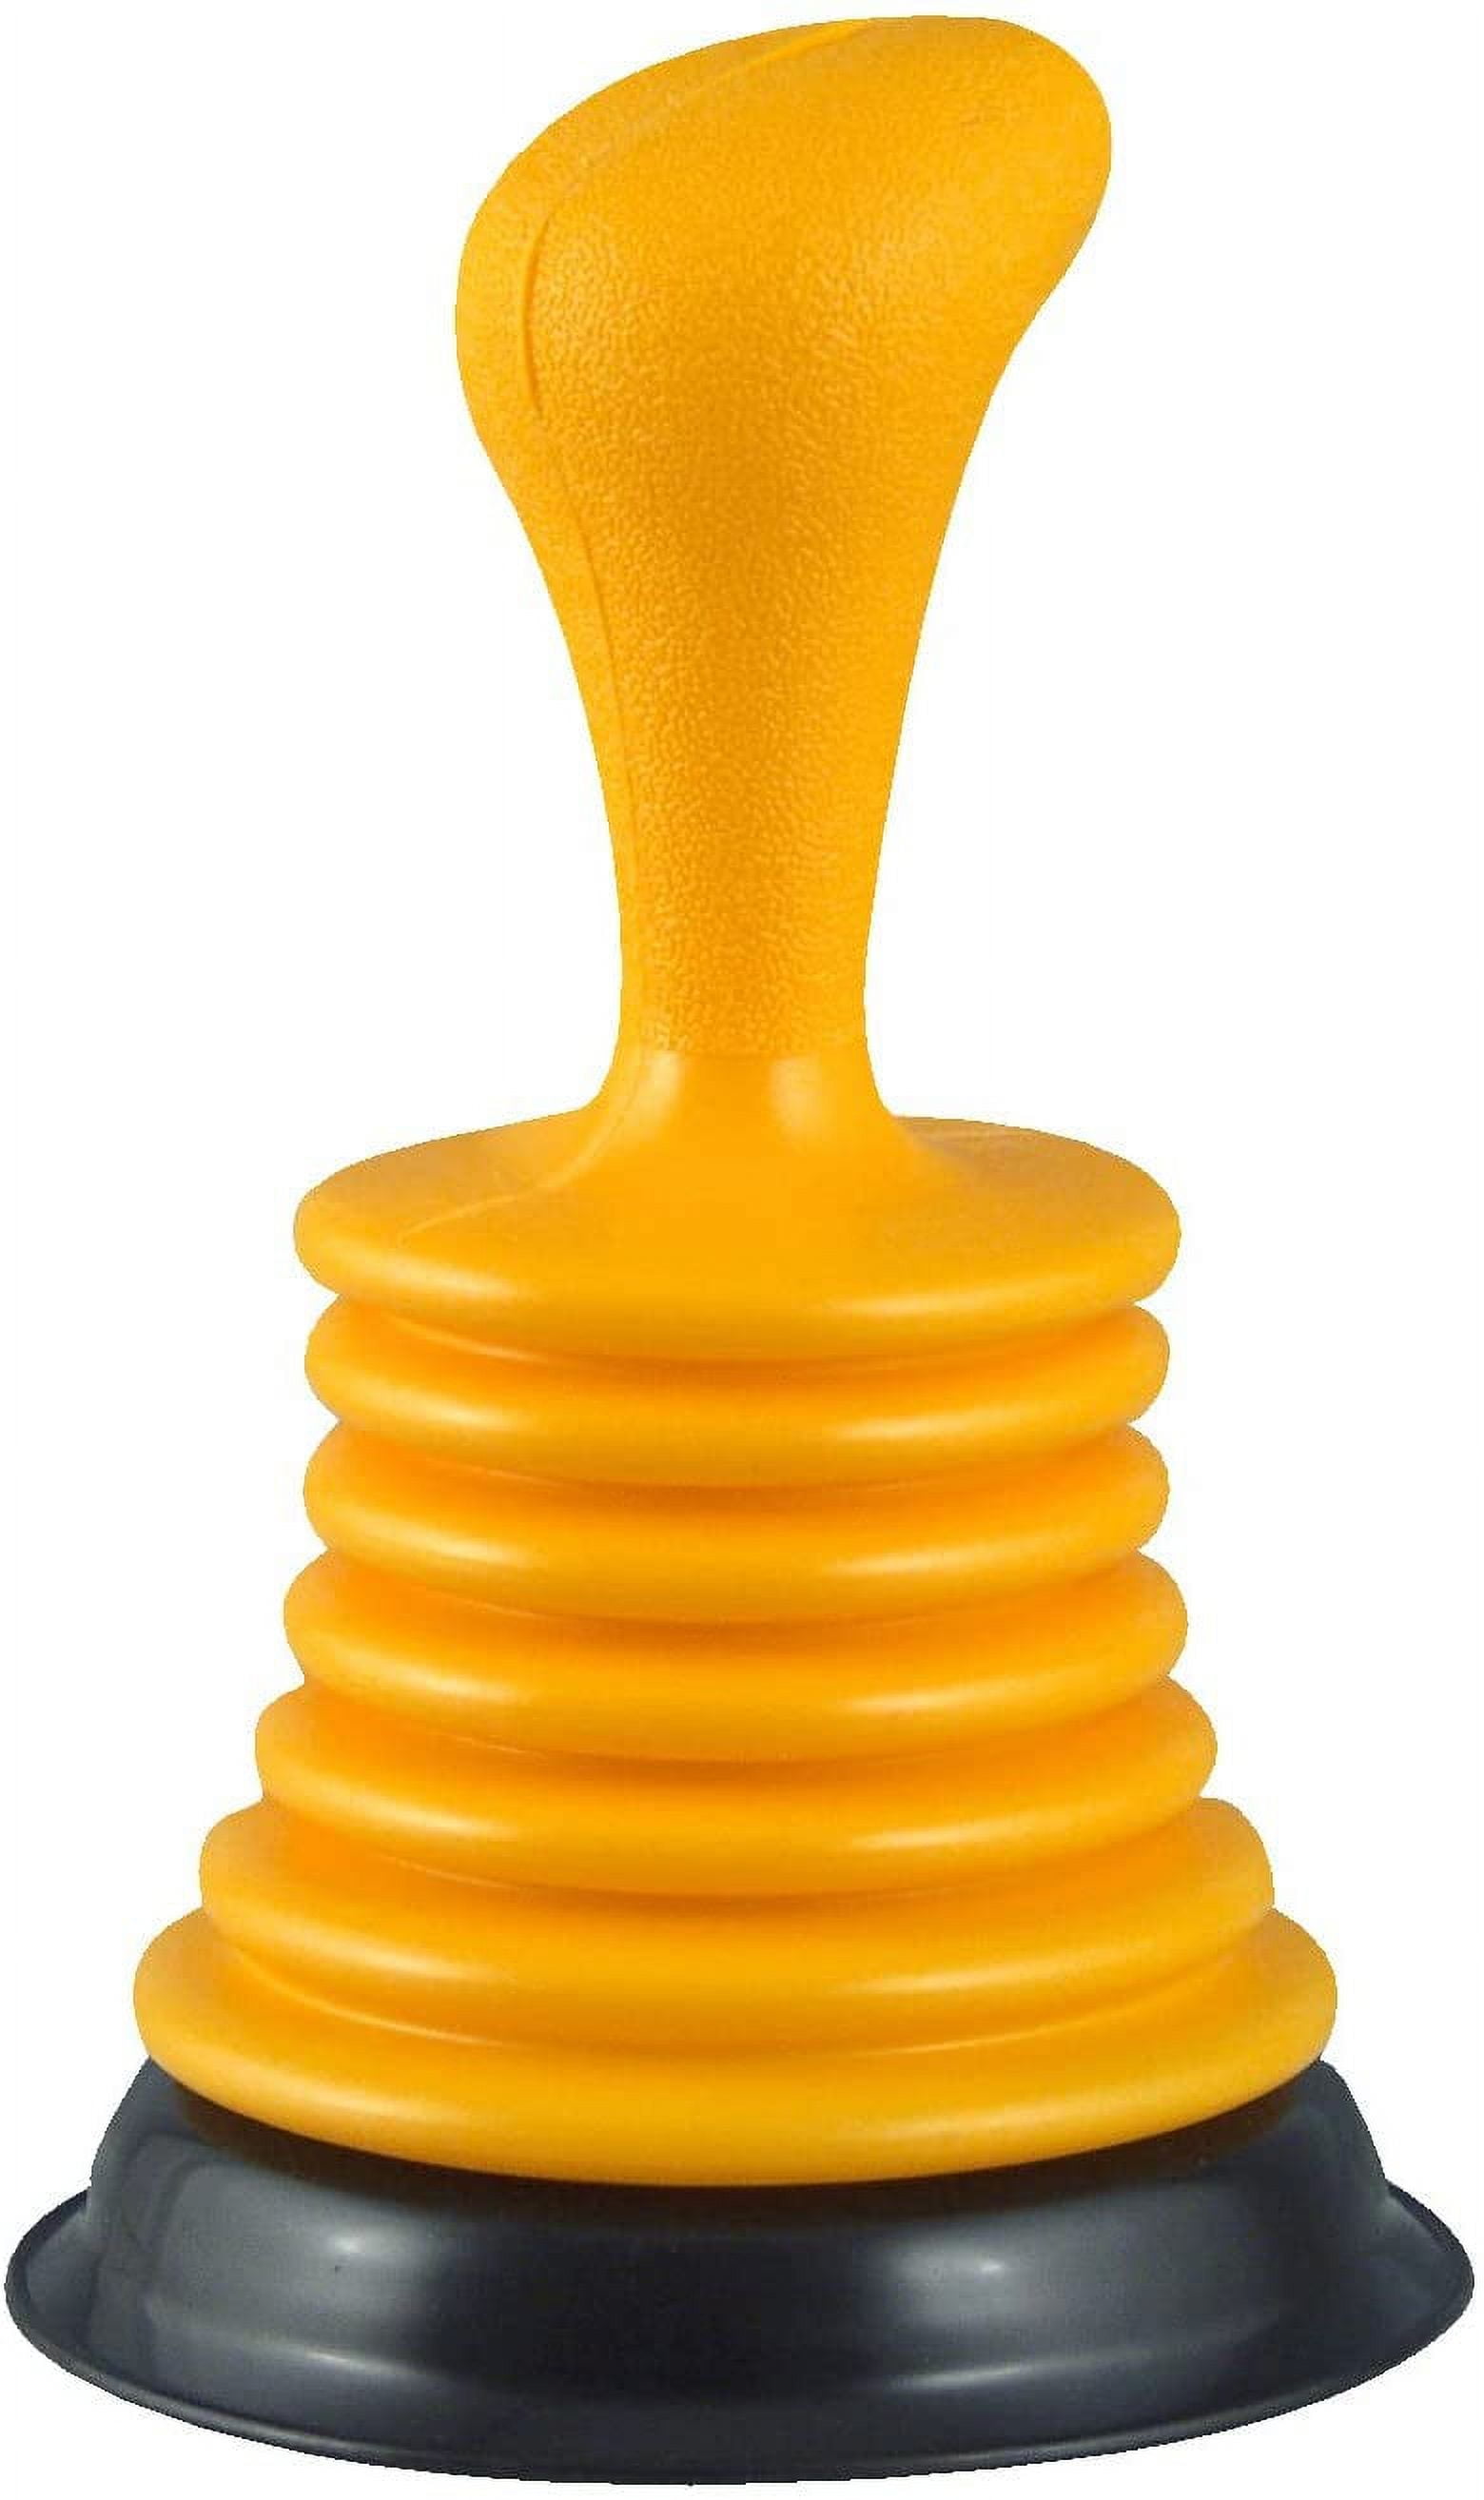 Plungeroo Mini Durable Plungers - Set of 2